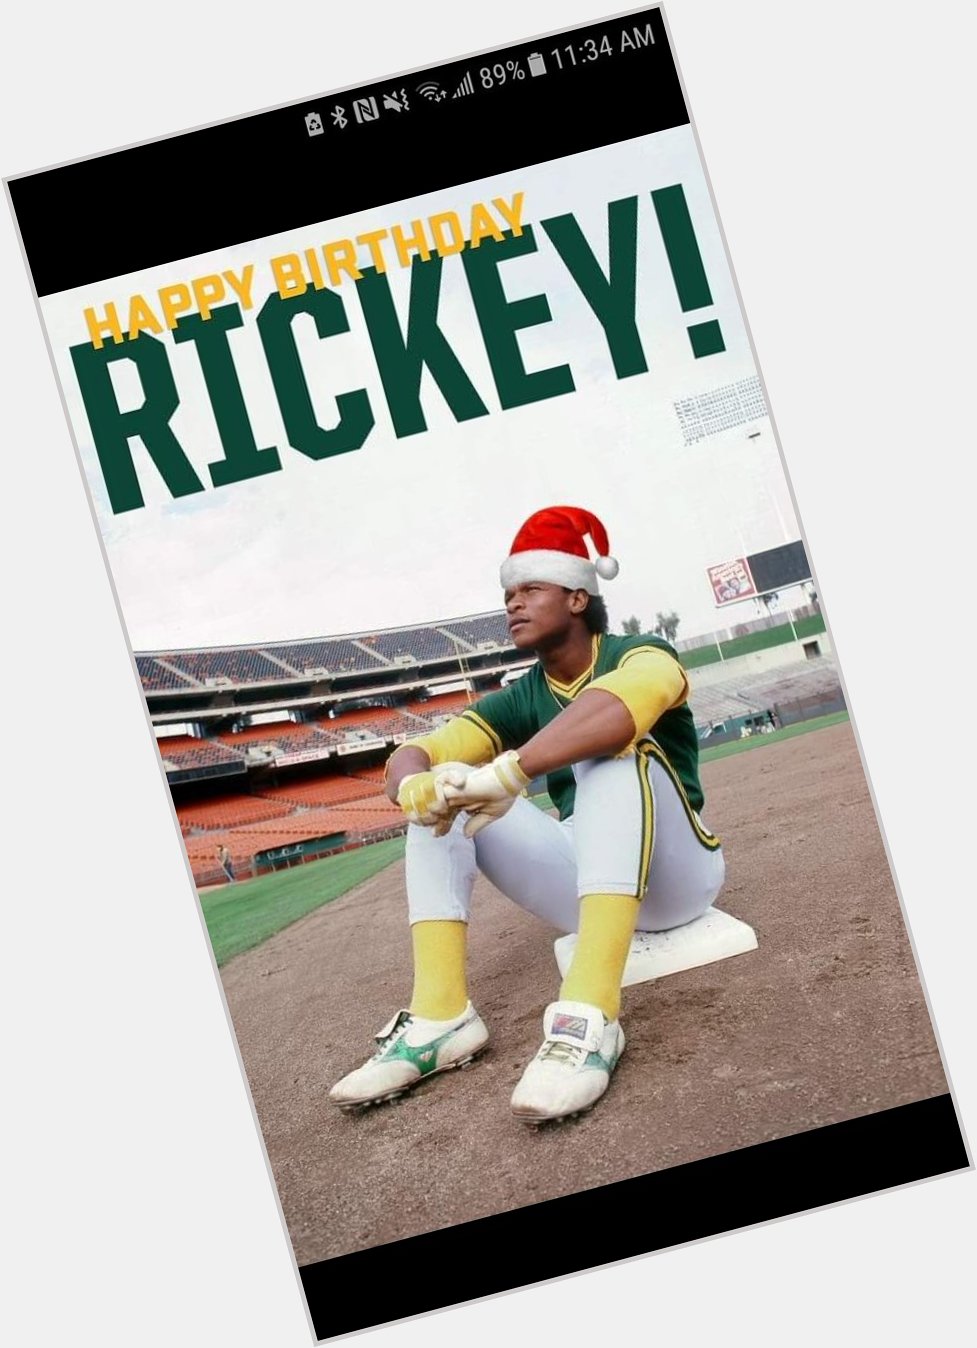 Happy birthday to Jesus and the GOAT Mr. Rickey Henderson! can\t wait for 2018 season! 